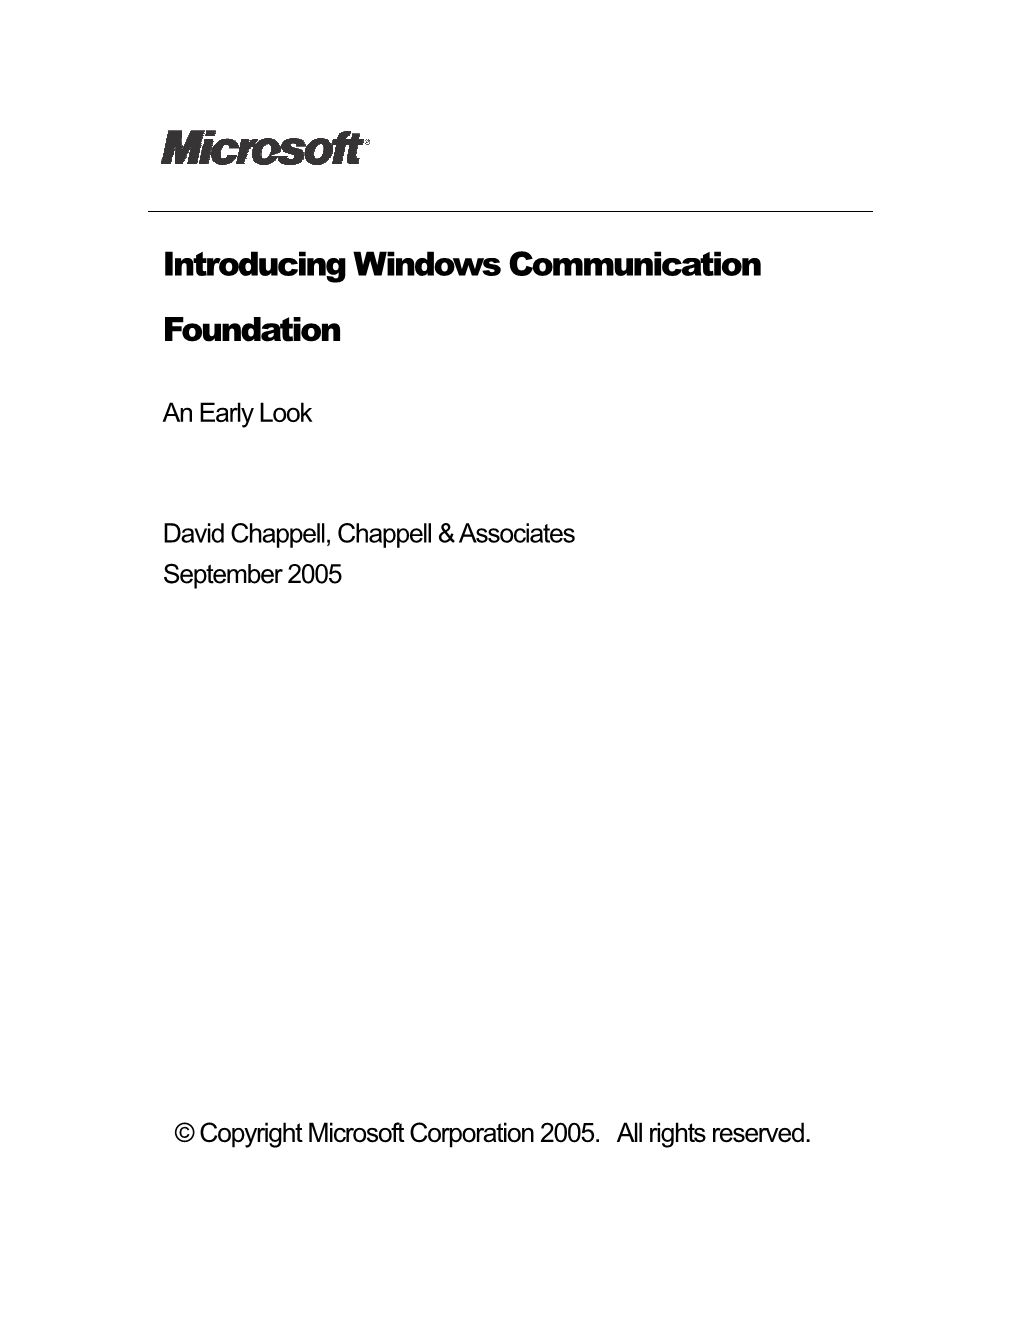 Windows Communication Foundation (WCF), Microsoft’S Forthcoming Technology for Service- Oriented Applications, Is Designed to Address These Requirements